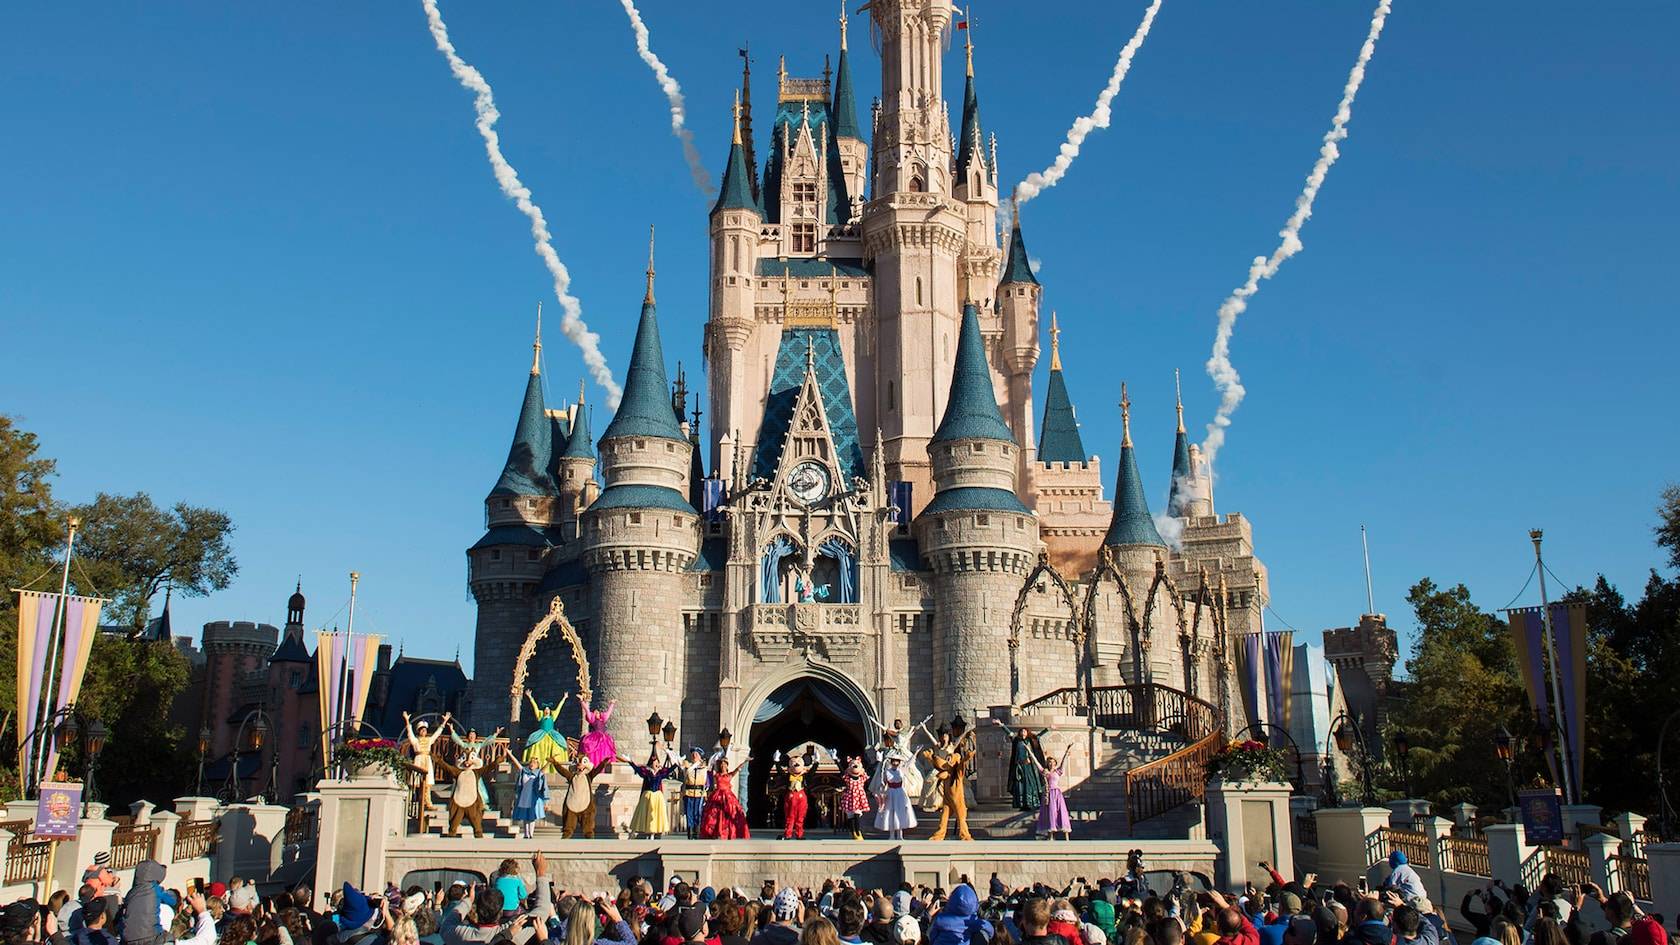 'Let the Magic Begin' set to return to the Magic Kingdom according to the latest calendar update